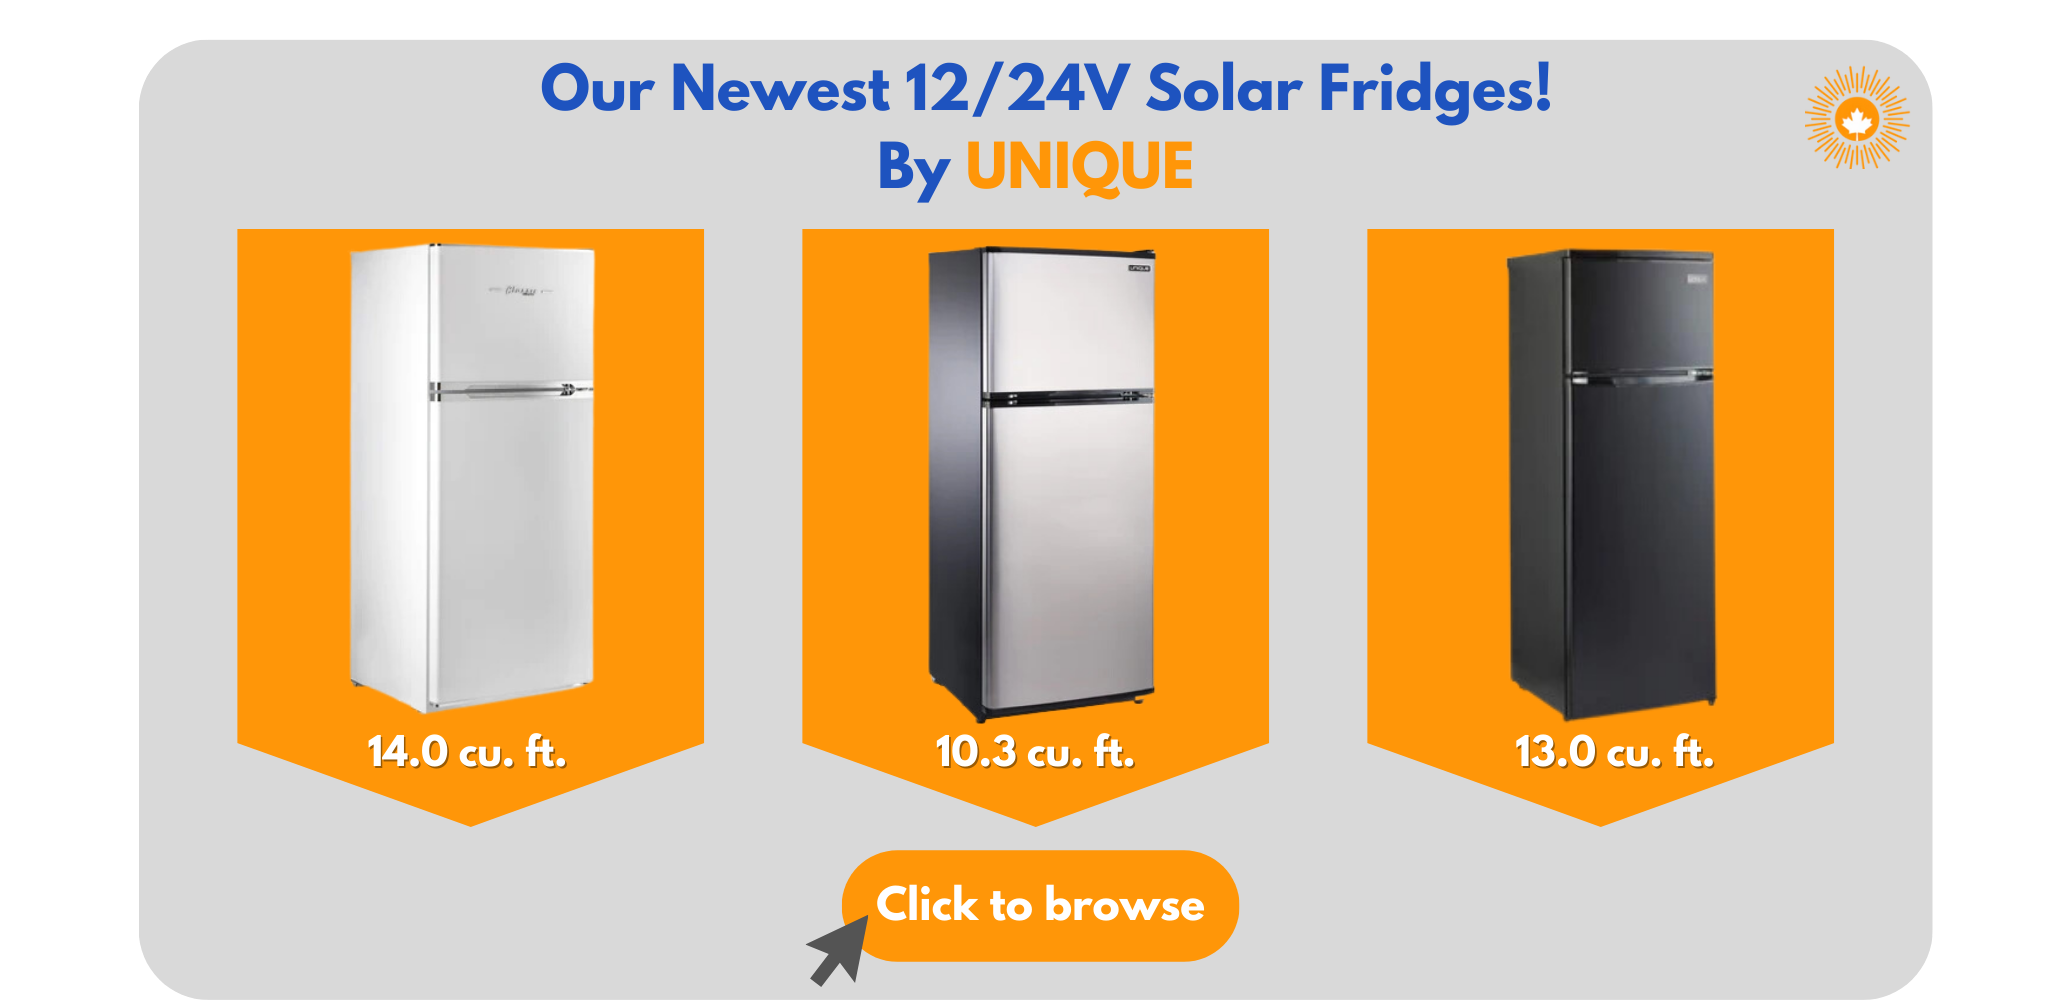 ft propane freezers products glenergy off grid depot off grid living products solar system equipment propane fridges ranges water heaters